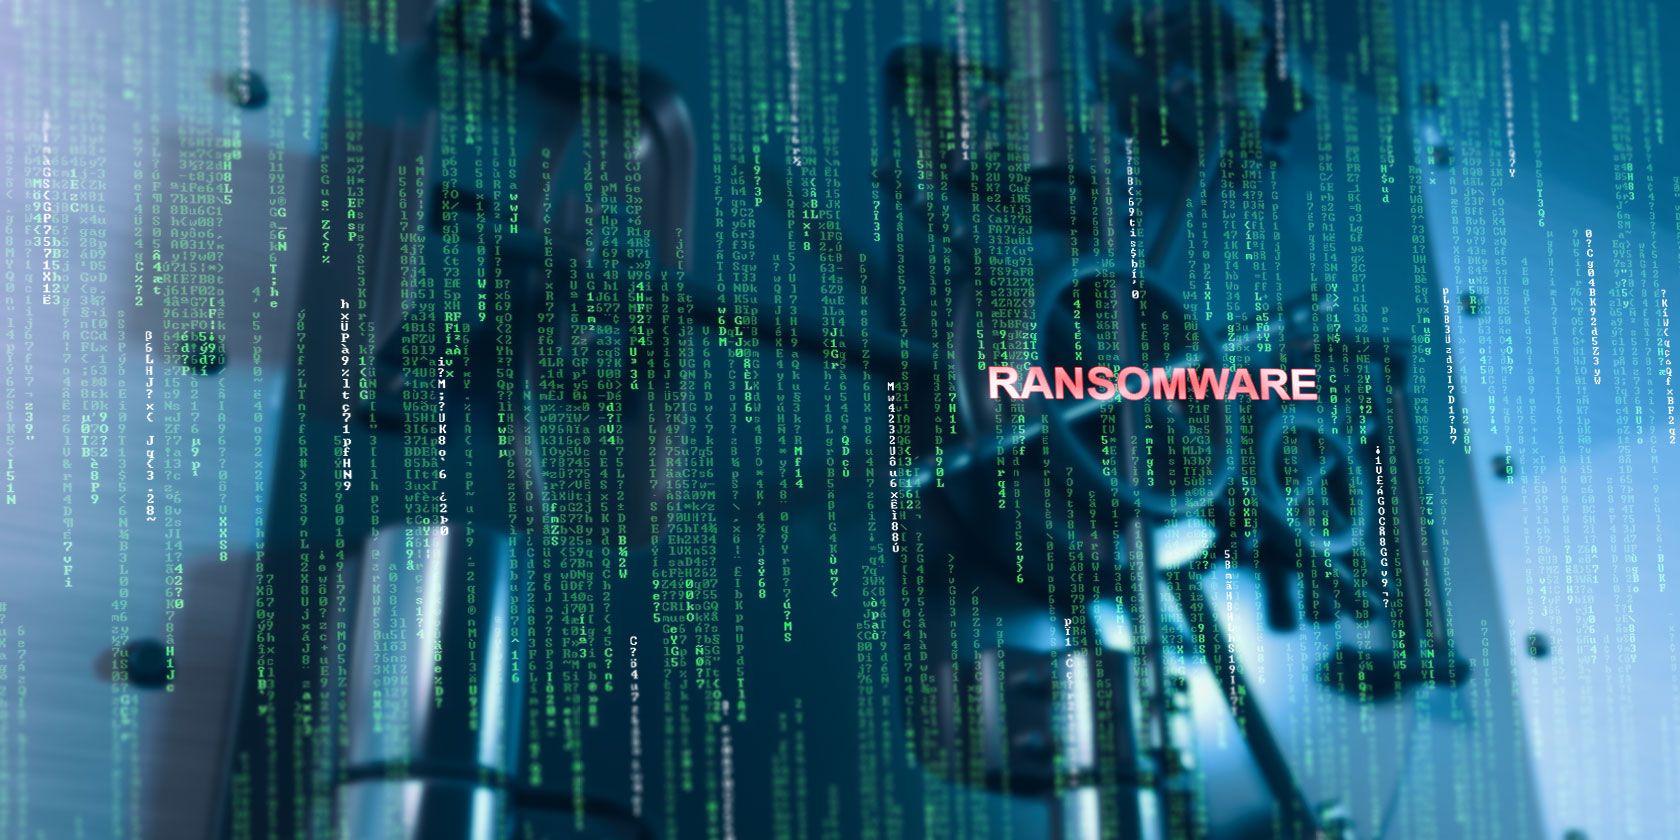 Photo of a ransomware illustration